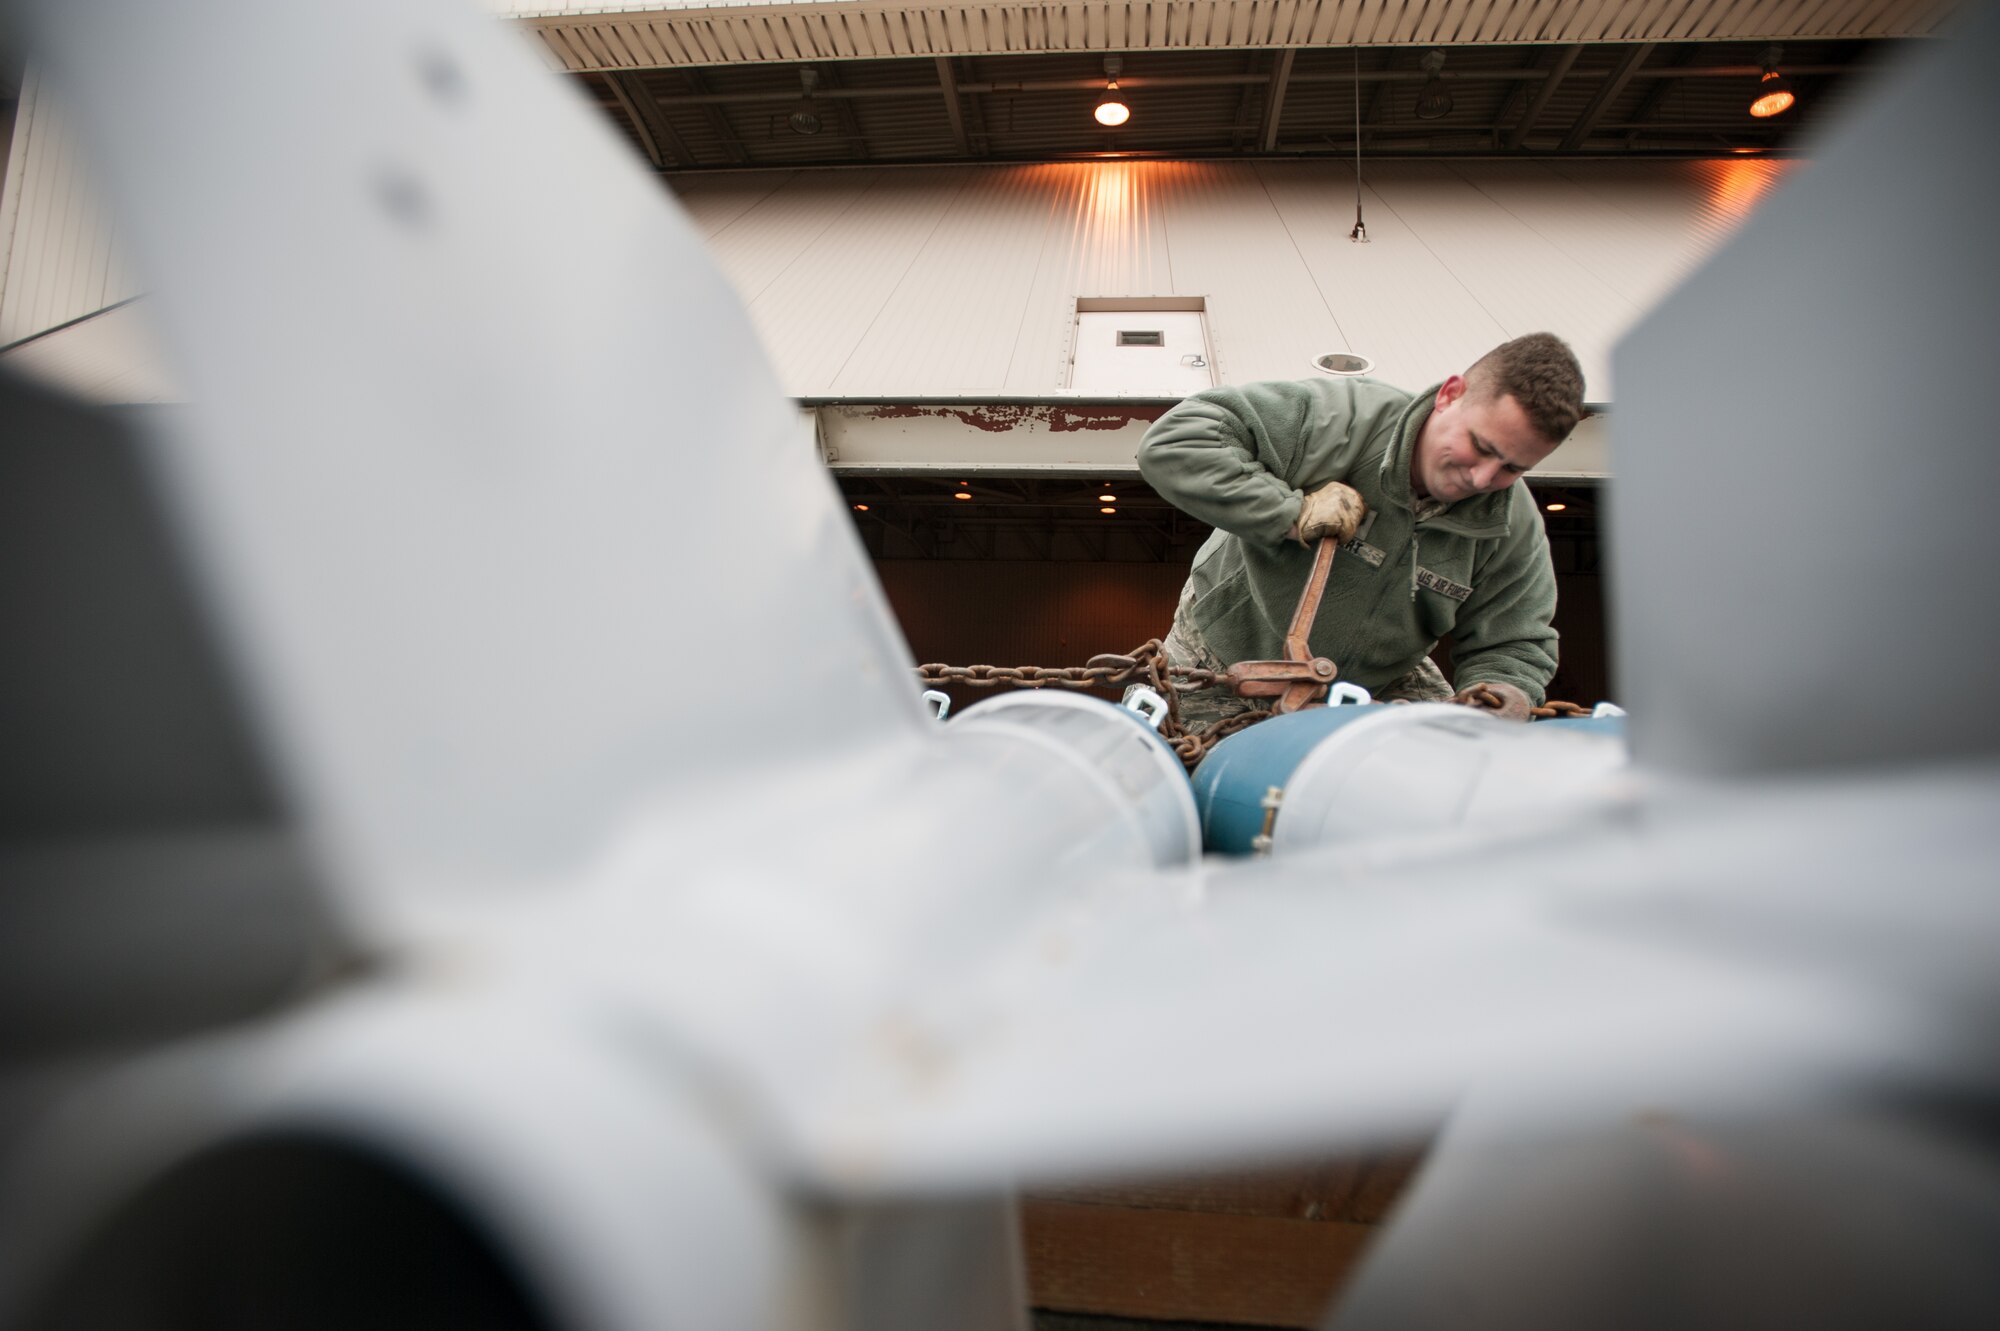 Senior Airman Dale Hart loads F-16 Fighting Falcon training munitions onto a trailer during Red Flag-Alaska 15-1 Oct. 15, 2014, at Eielson Air Force Base, Alaska. The Pacific Air Forces field training exercise focused on improving combat readiness of U.S. and international forces flown under simulated air combat conditions to prepare for realistic threats. Hart is a 8th Maintenance Squadron munitions systems crew chief. (U.S. Air Force photo/Senior Airman Taylor Curry)